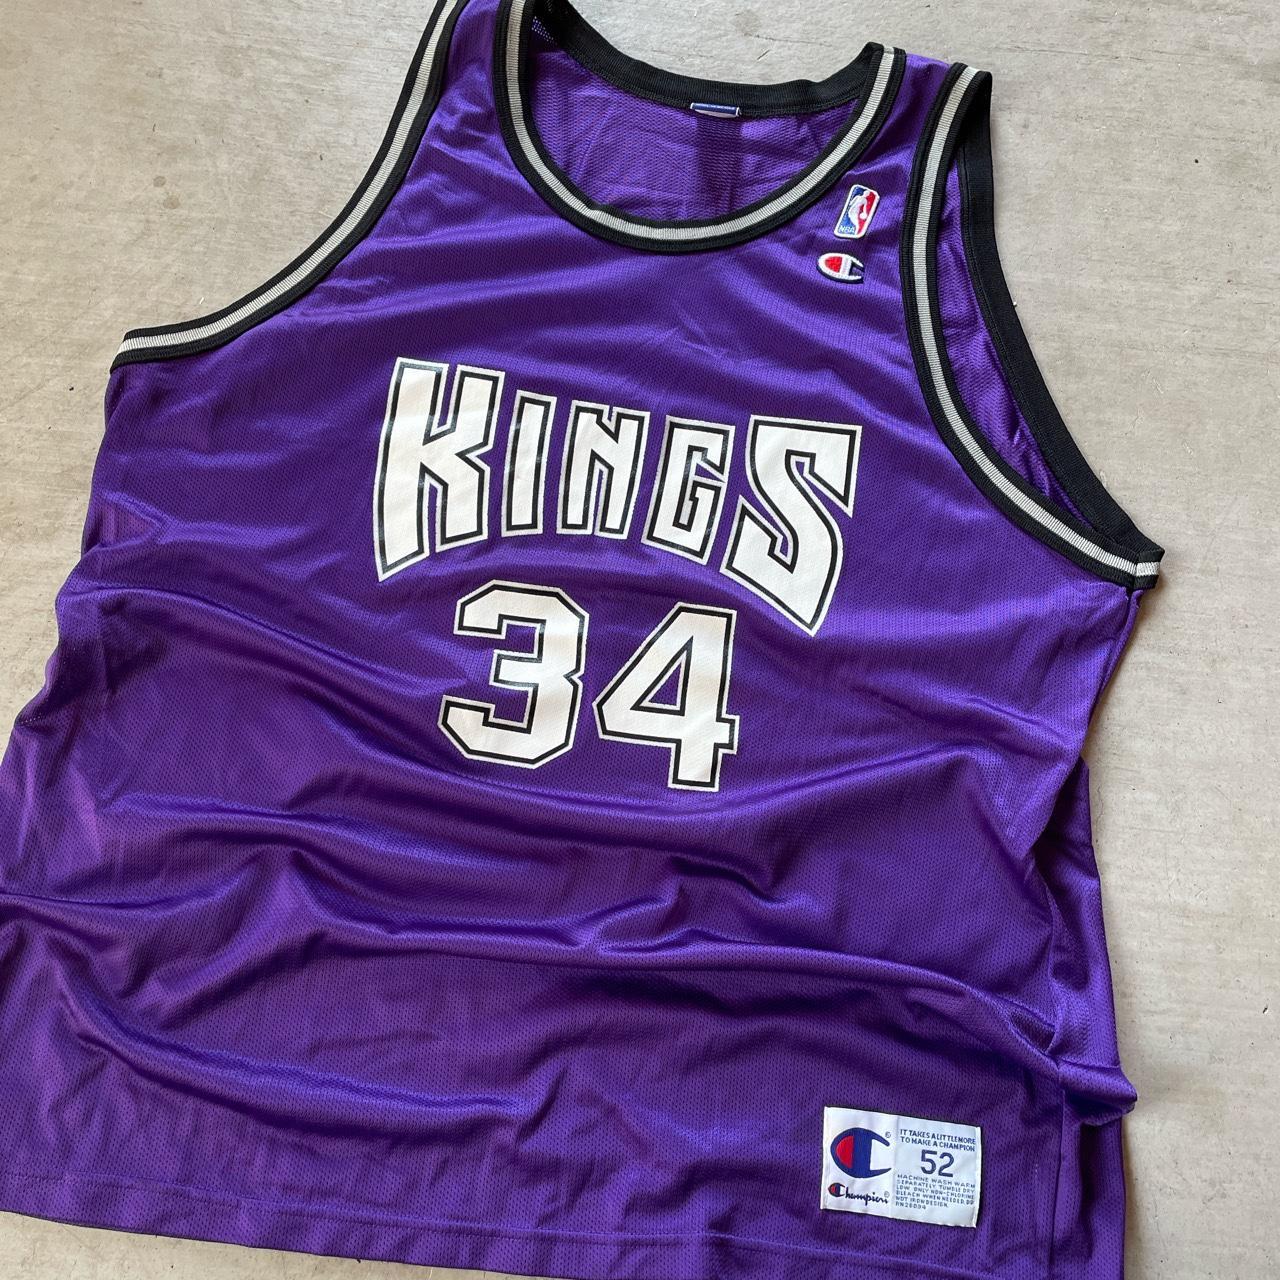 SACRAMENTO KINGS Corliss Williamson #34 Jersey “TheBigNasty” PURPLE Adult  MEN size small /youth XL RARE Vintage “LightTheBeam” “Playoffs” for Sale in  Sacramento, CA - OfferUp